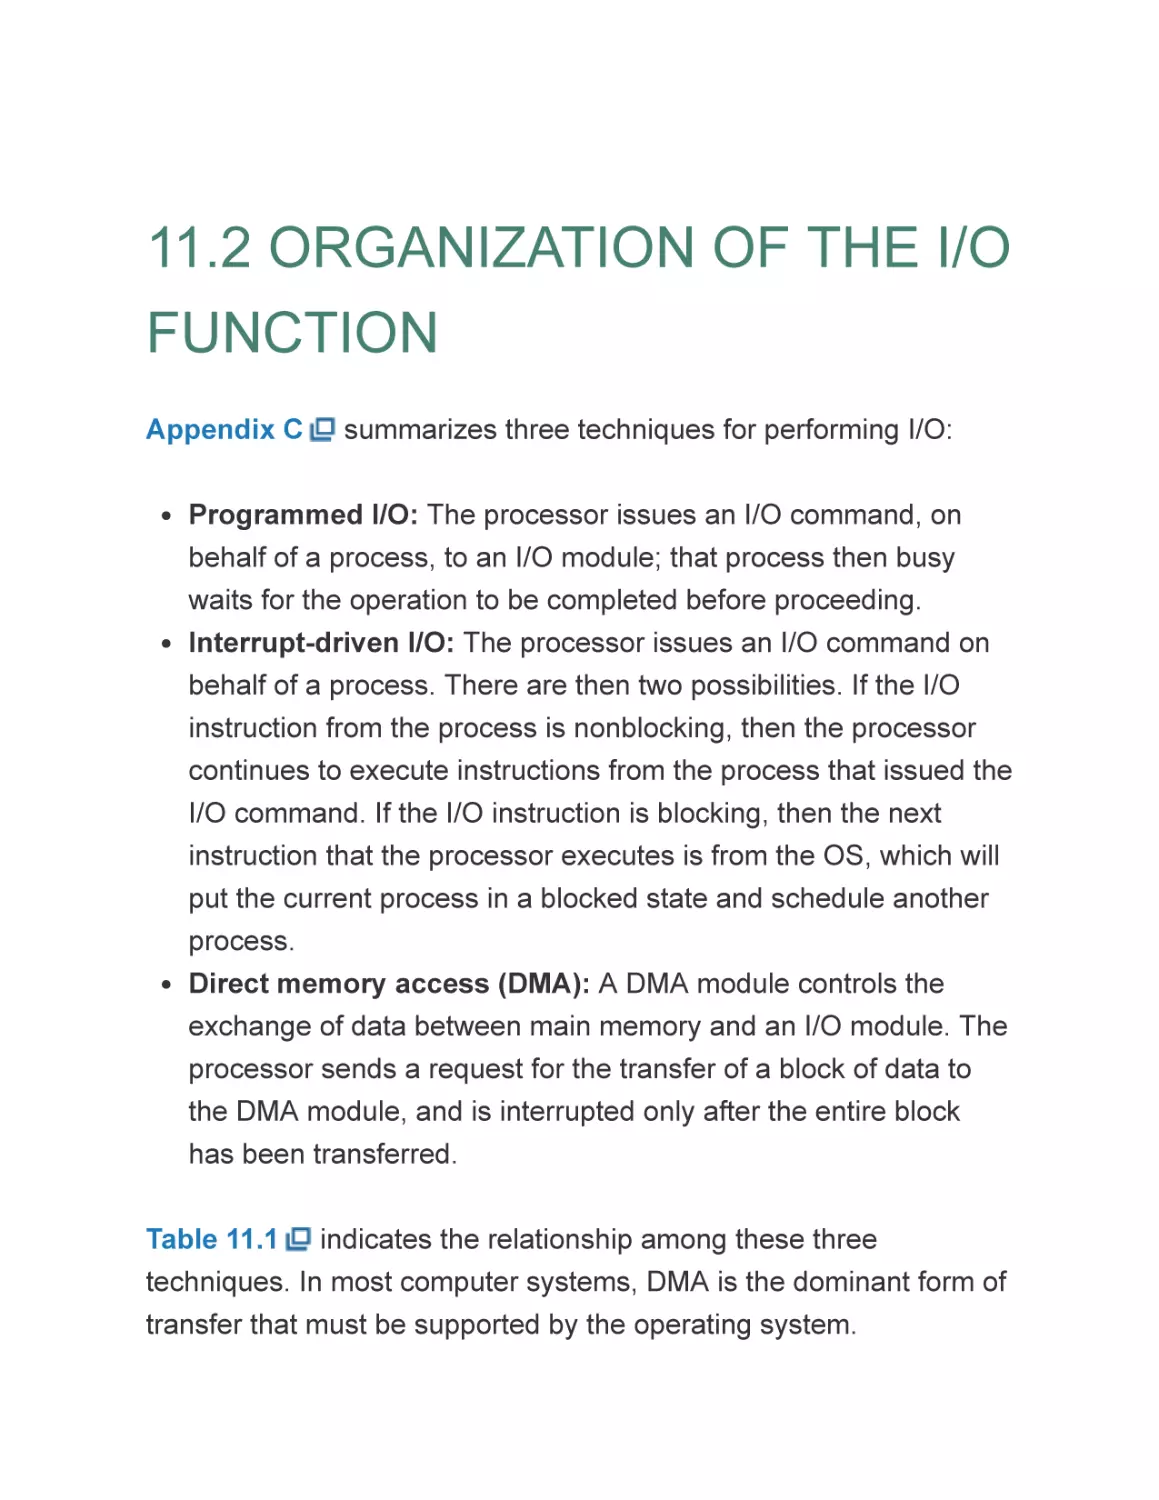 11.2 ORGANIZATION OF THE I/O FUNCTION